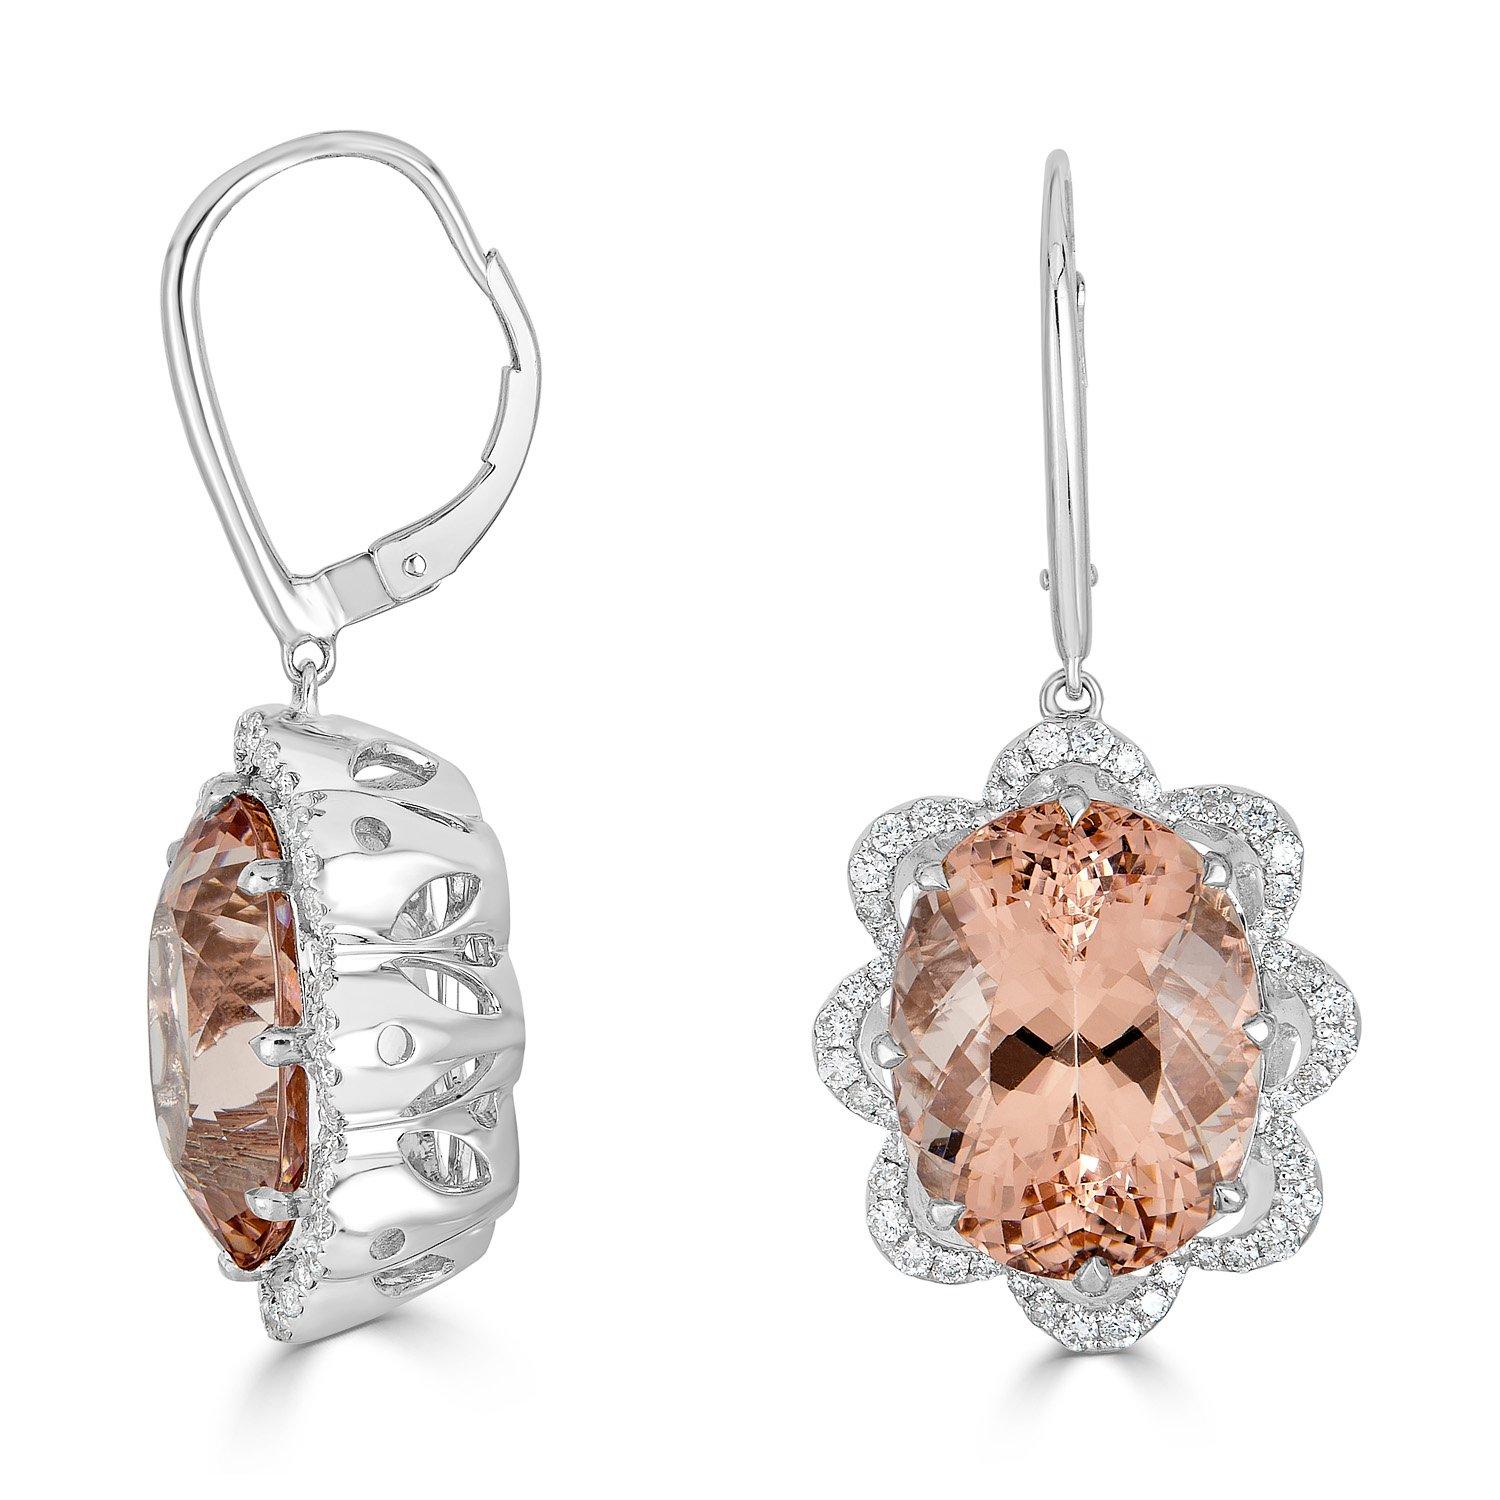 This pair of earrings is really stylish with 14k two-tone gold and embodies a pretty look. The oval cut Morganite along with round Diamonds will brighten your style like magic.

23.28 tct Morganite (2pcs)
0.81tct Diamond Accents
14K White and Rose